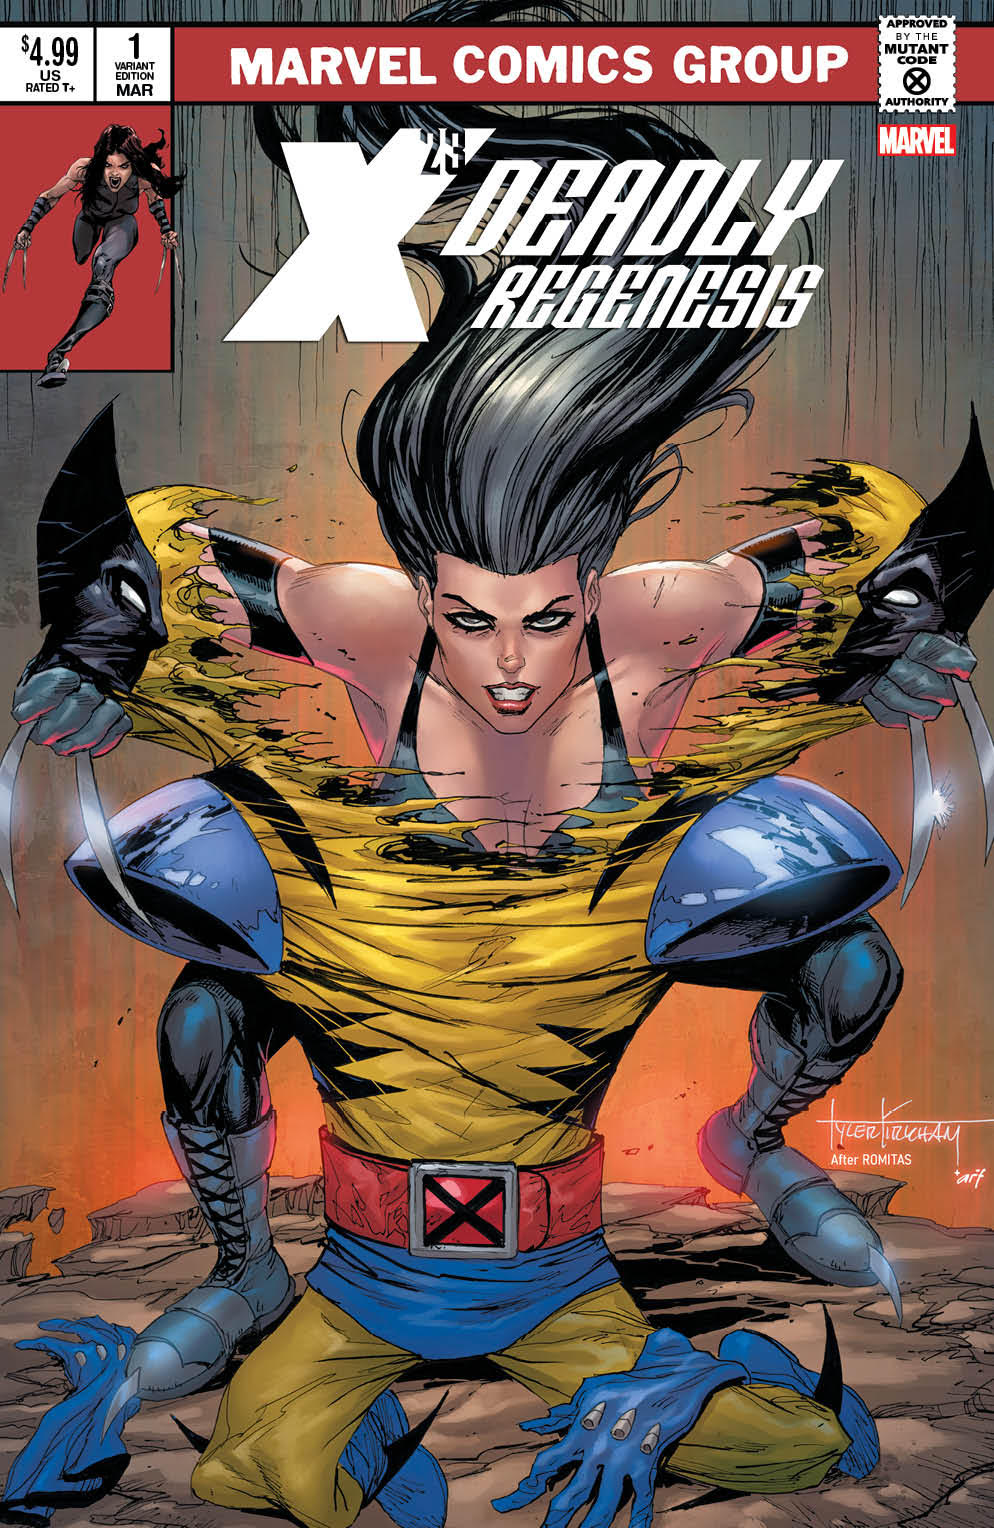 X-23 DEADLY REGENESIS #1 TYLER KIRKHAM TRADE DRESS VARIANT LIMITED TO 1500 WITH NUMBERED COA